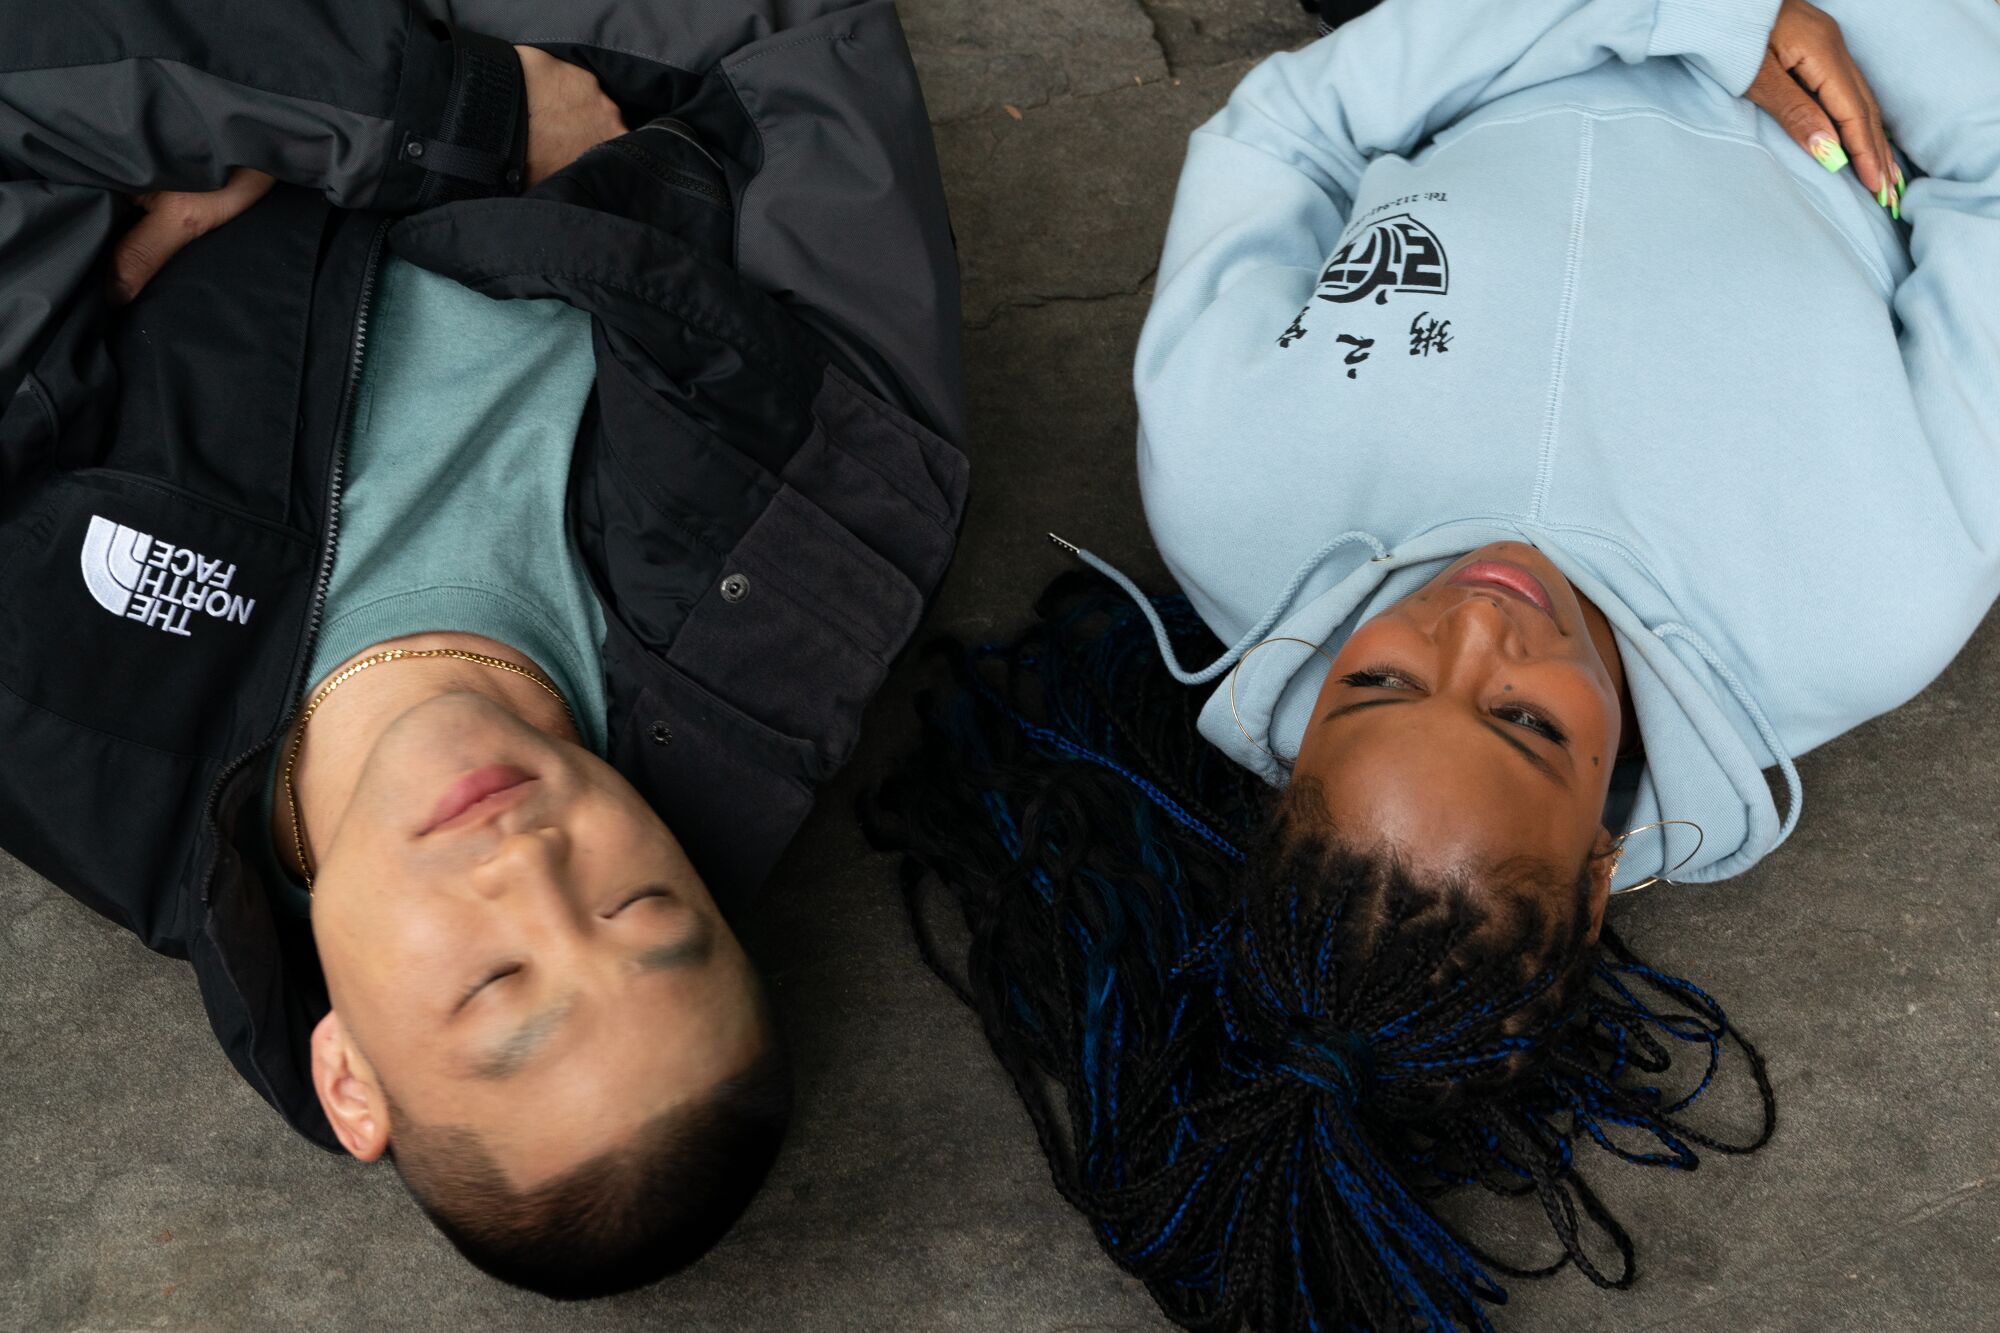 Taylor Takahashi lies on a floor, eyes closed, alongside Taylour Paige in a scene from the movie.